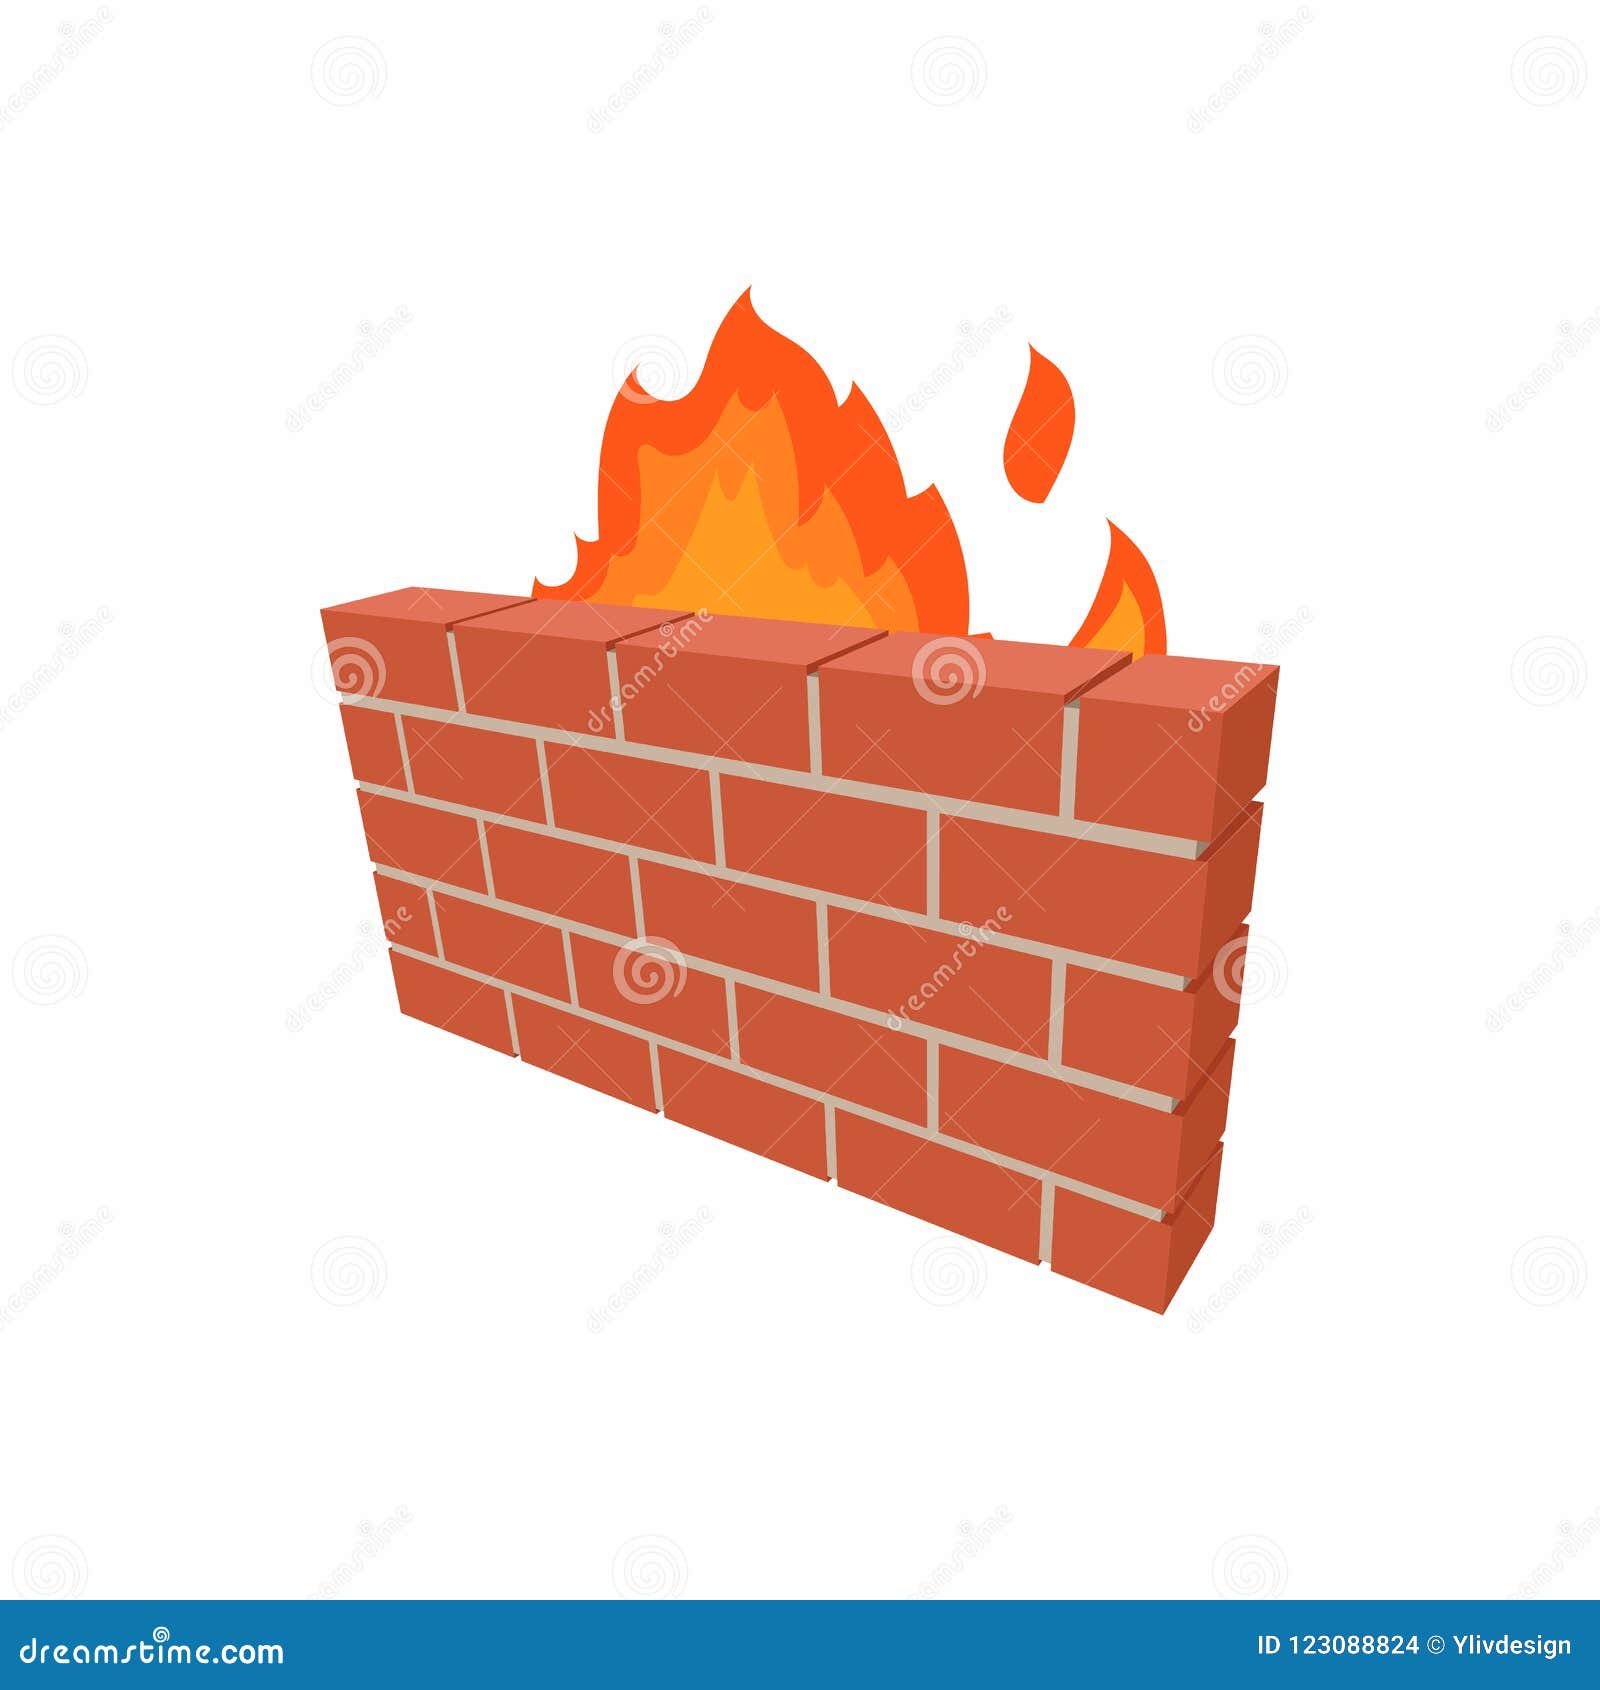 firewall icon in cartoon style